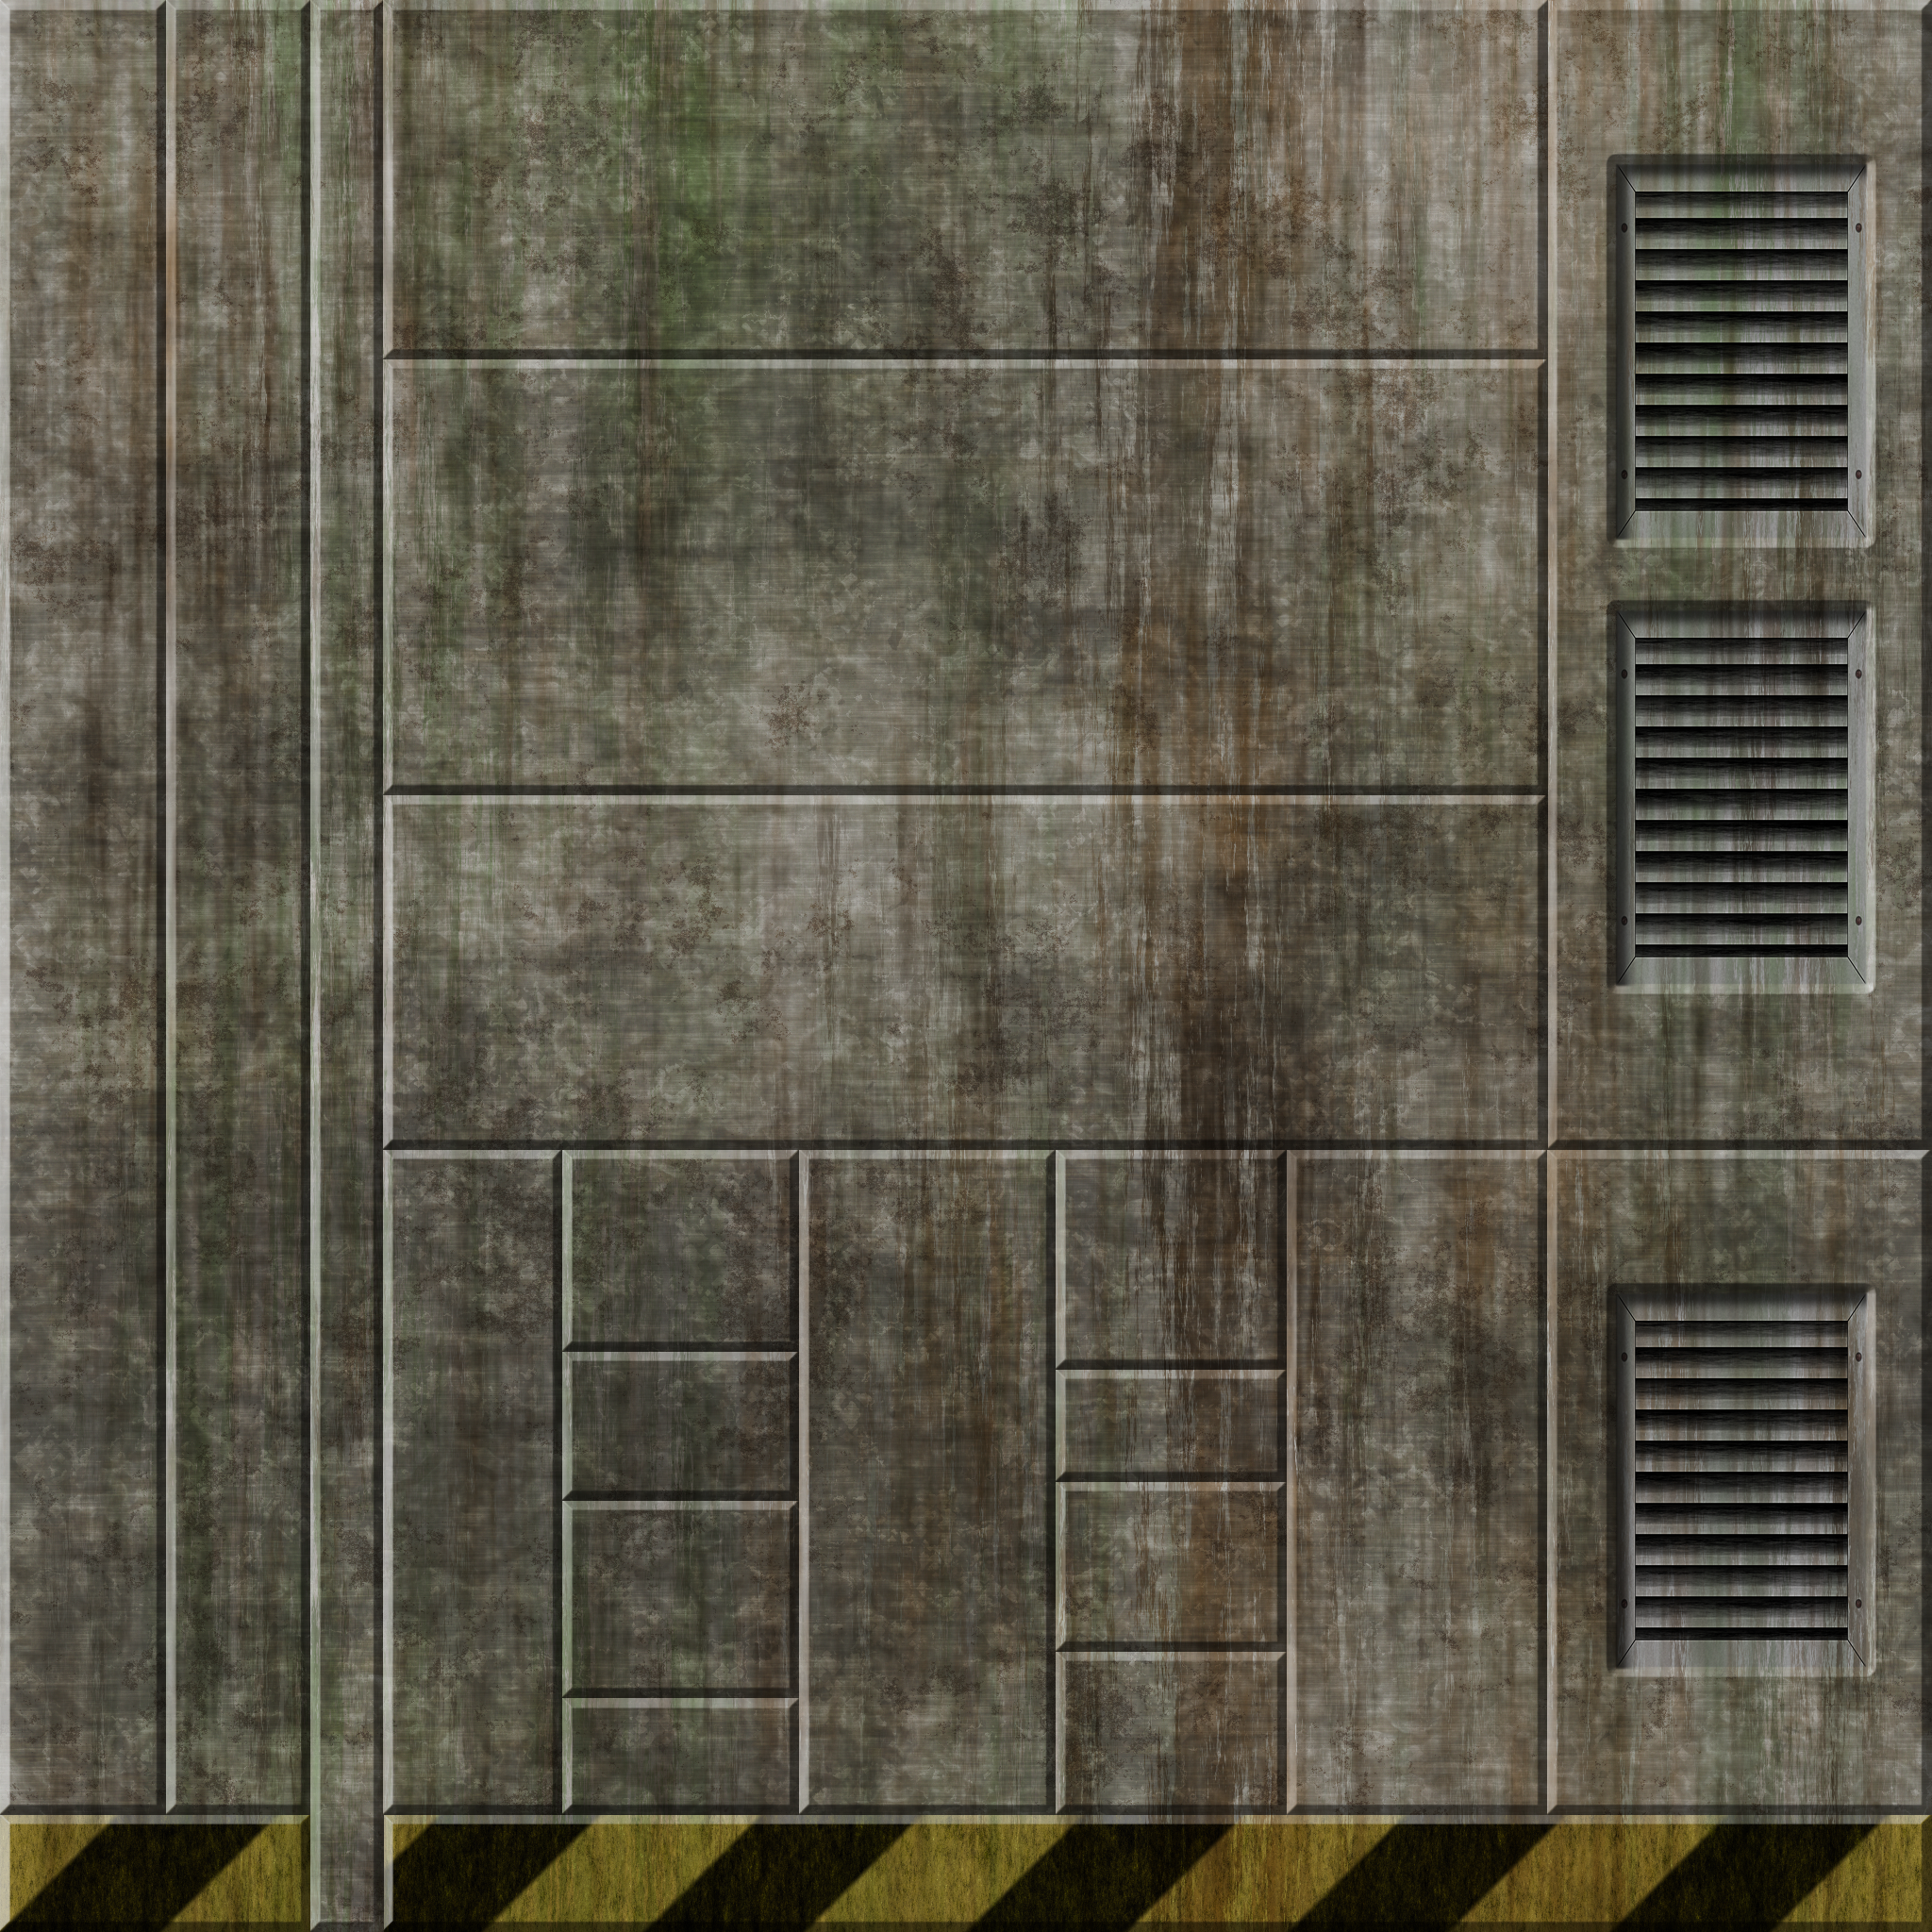 cement_wall_5_remake_by_hoover1979-dar4bpg.png